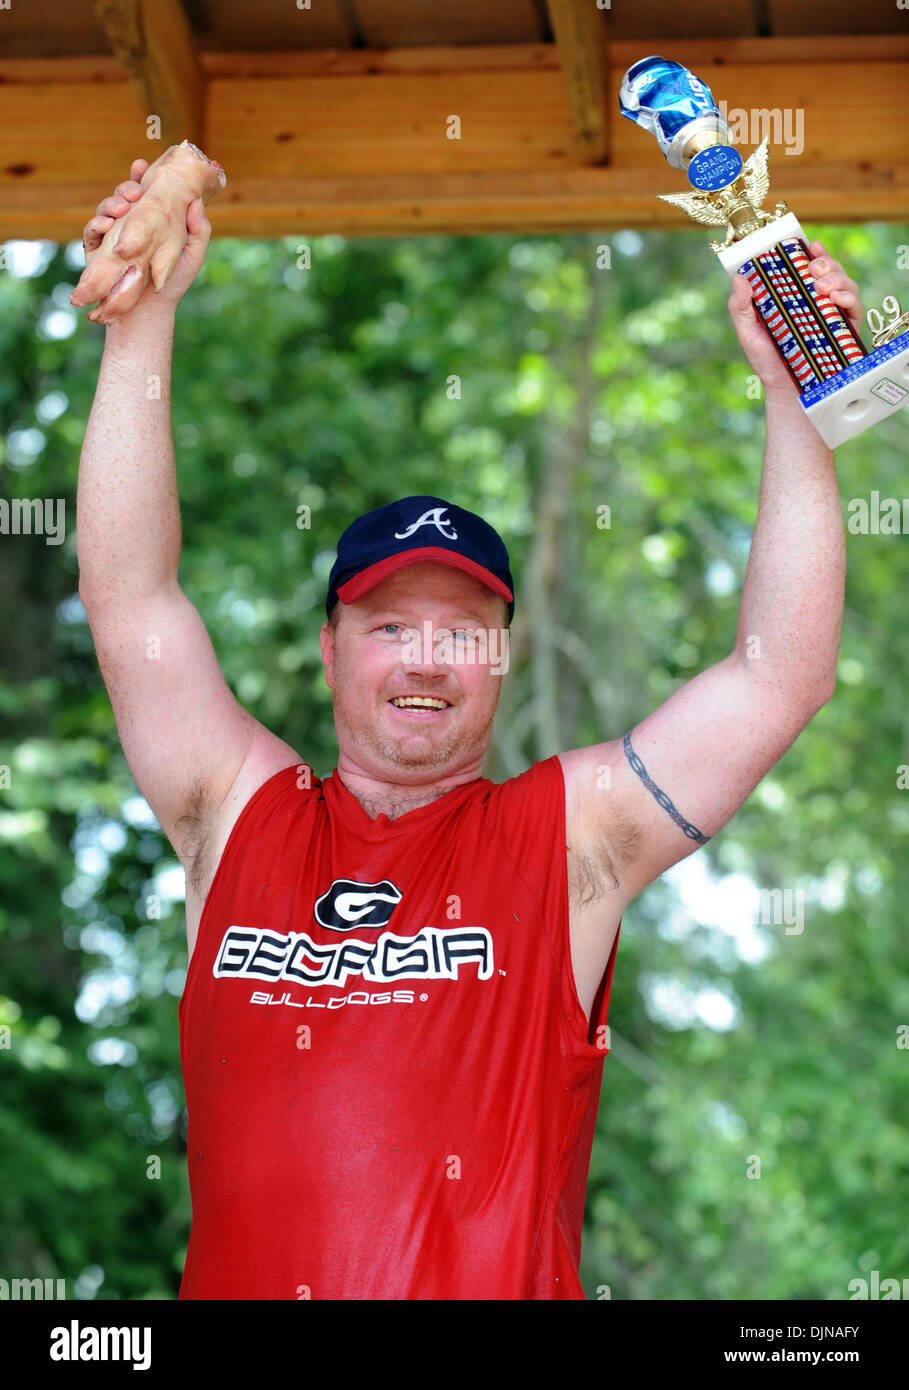 Mar 11, 2008 - East Dublin, Georgia, USA - Bobbing for Pigs Feet winner Eric Outler celebrates his victory during the 13th annual Summer Redneck Games at Buckeye Park in East Dublin, Georgia, on Saturday. The annual homage to Southerners, began as a spoof to the 1996 Summer Olympics in Atlanta. Thousands of revelers attend the event whose events include bobbing for pigs feet, the m Stock Photo